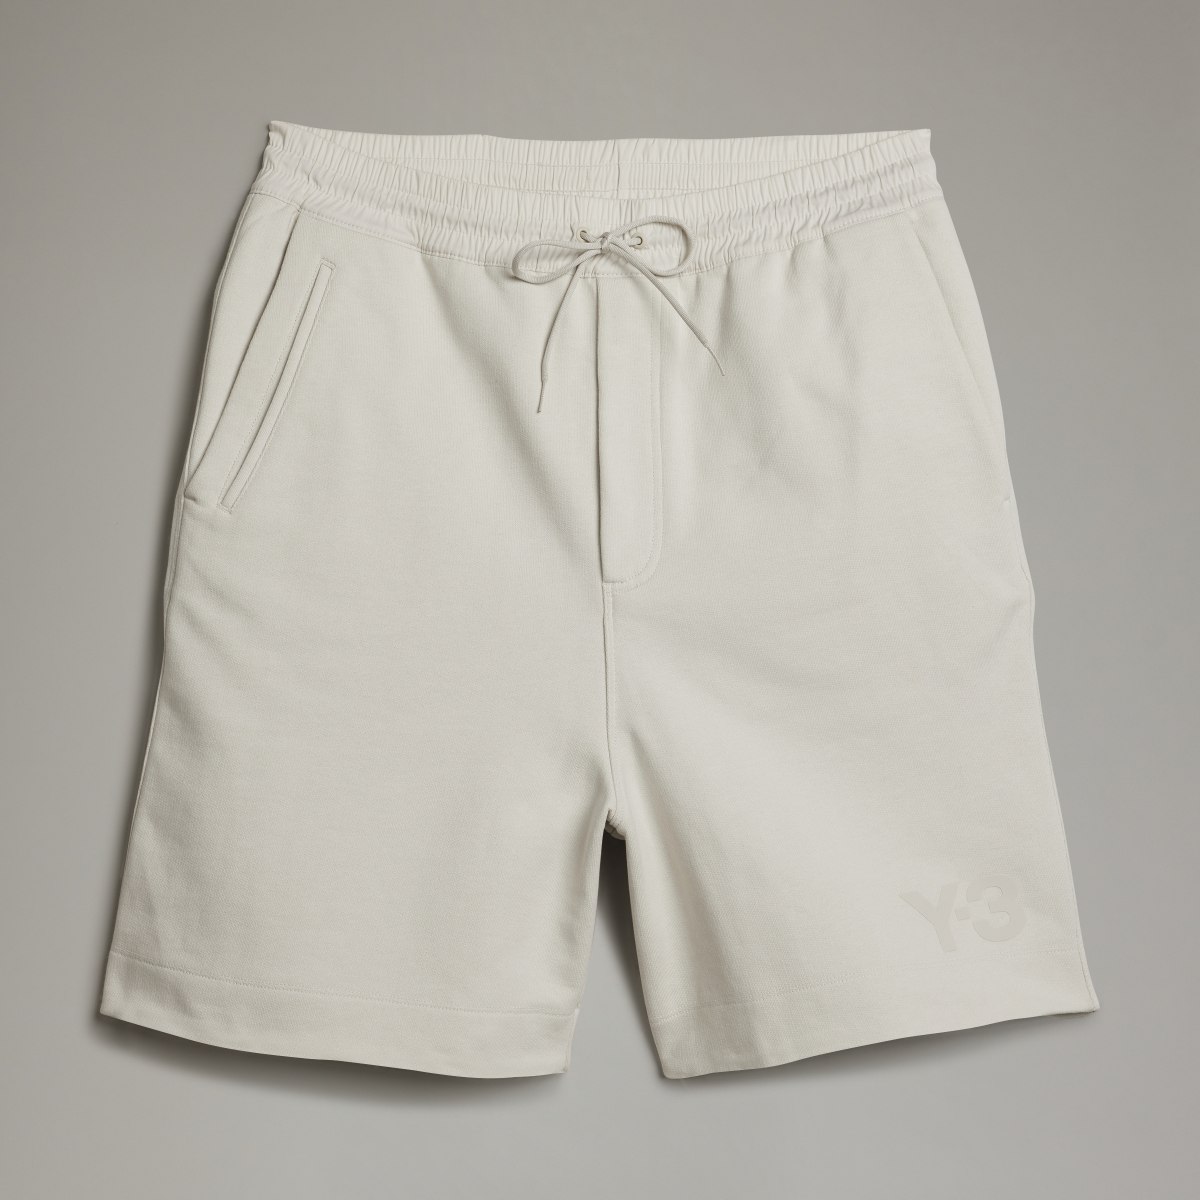 Adidas M CL TRY SHORTS. 5